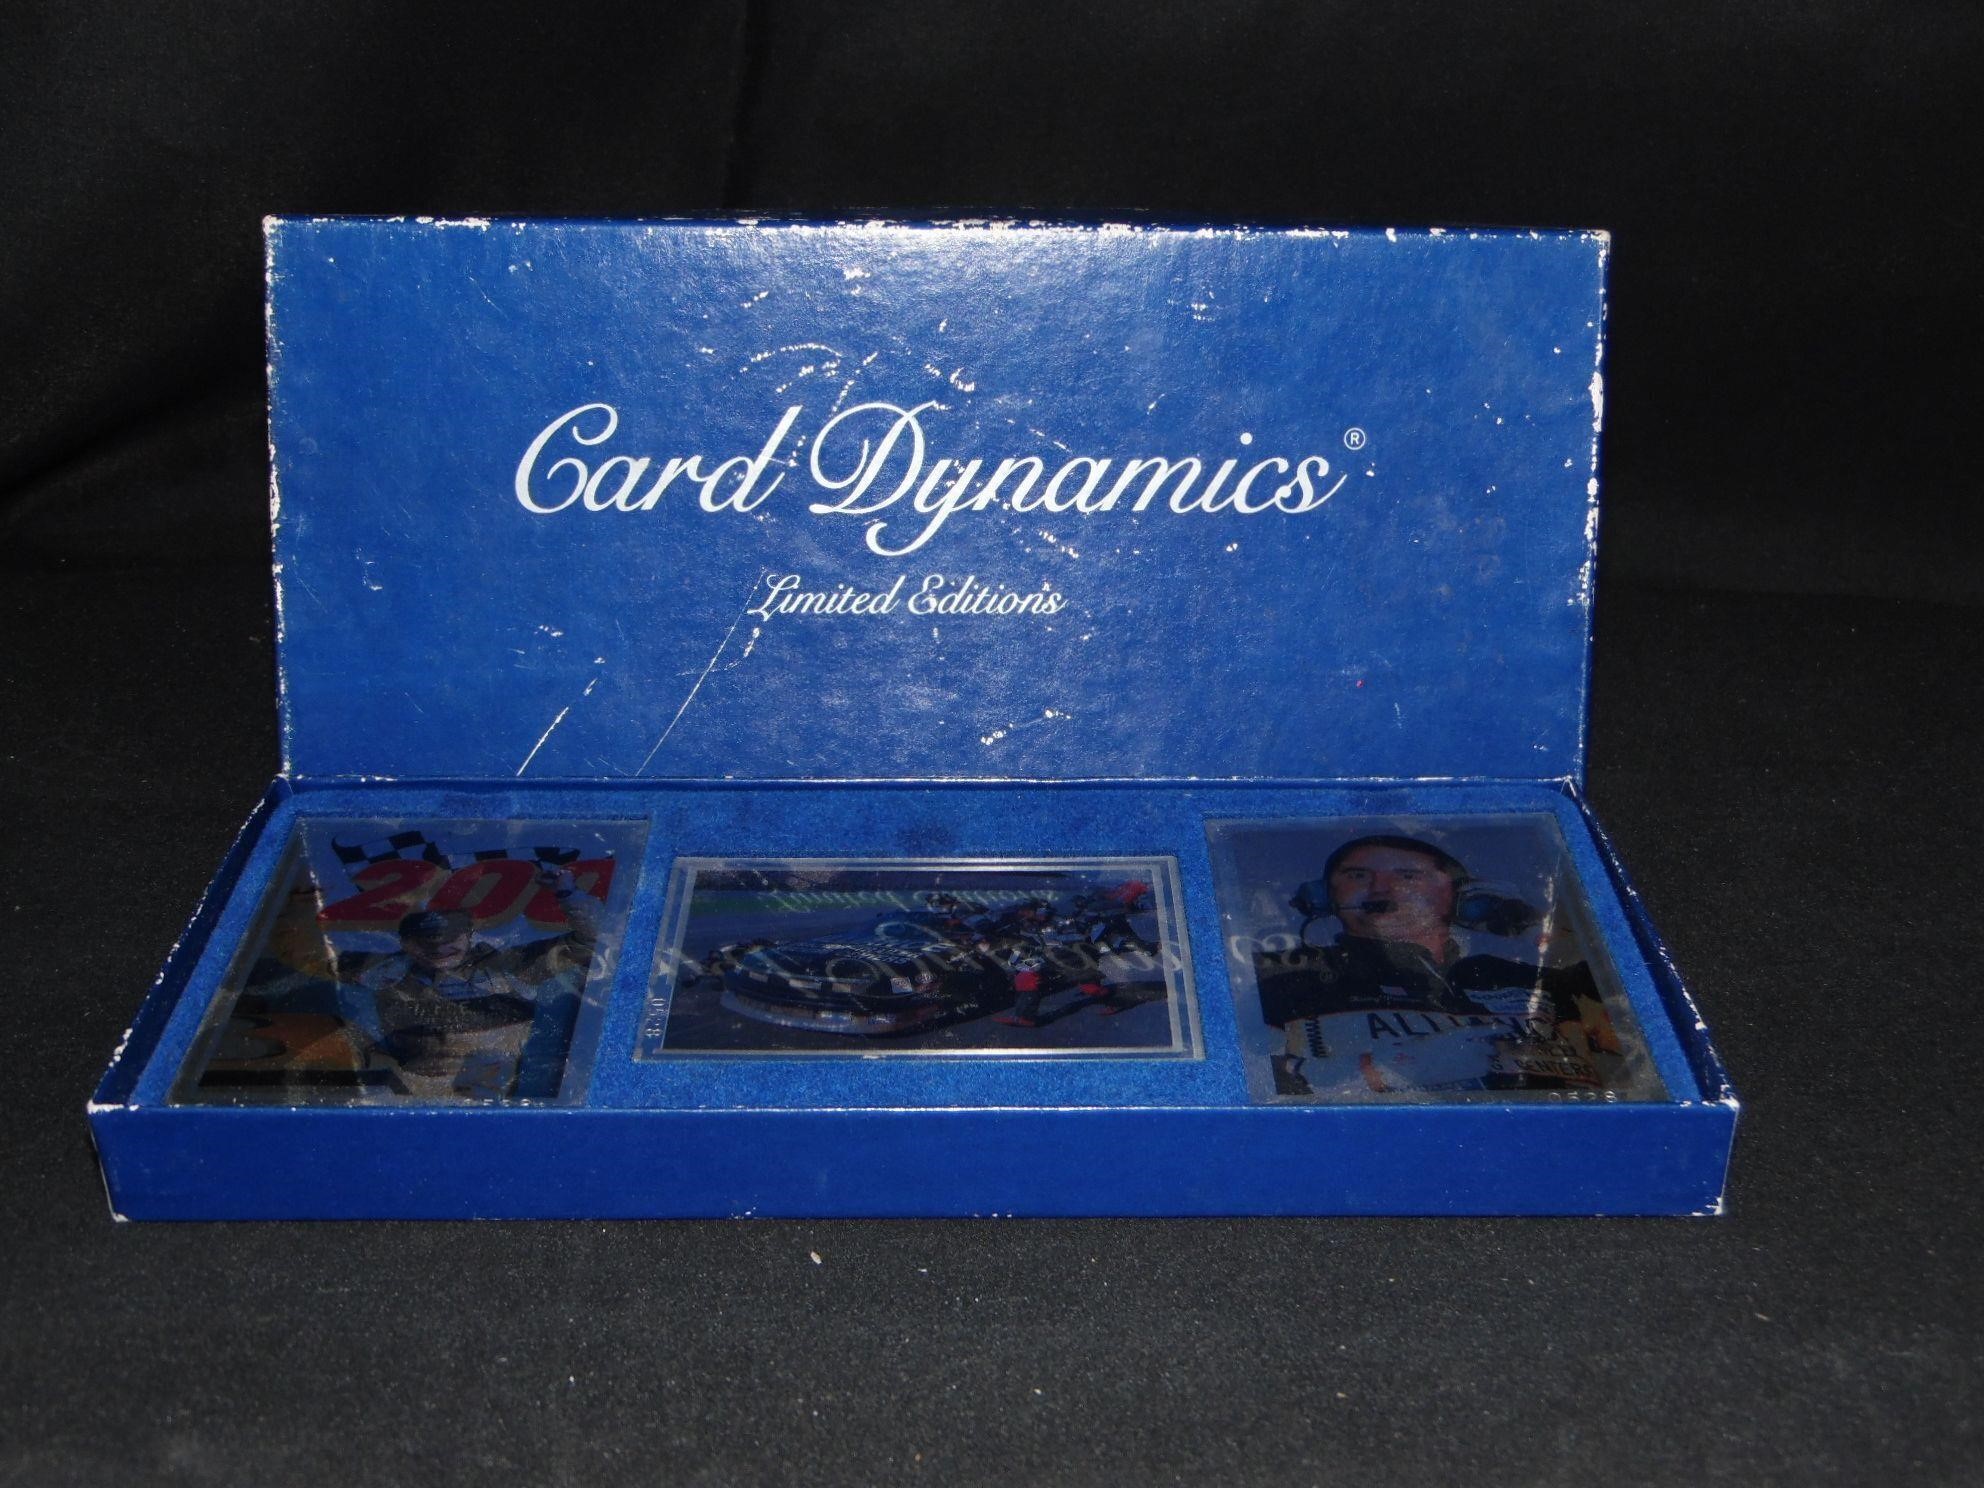 Card Dynamics Limited Editions Metal Trading Cards